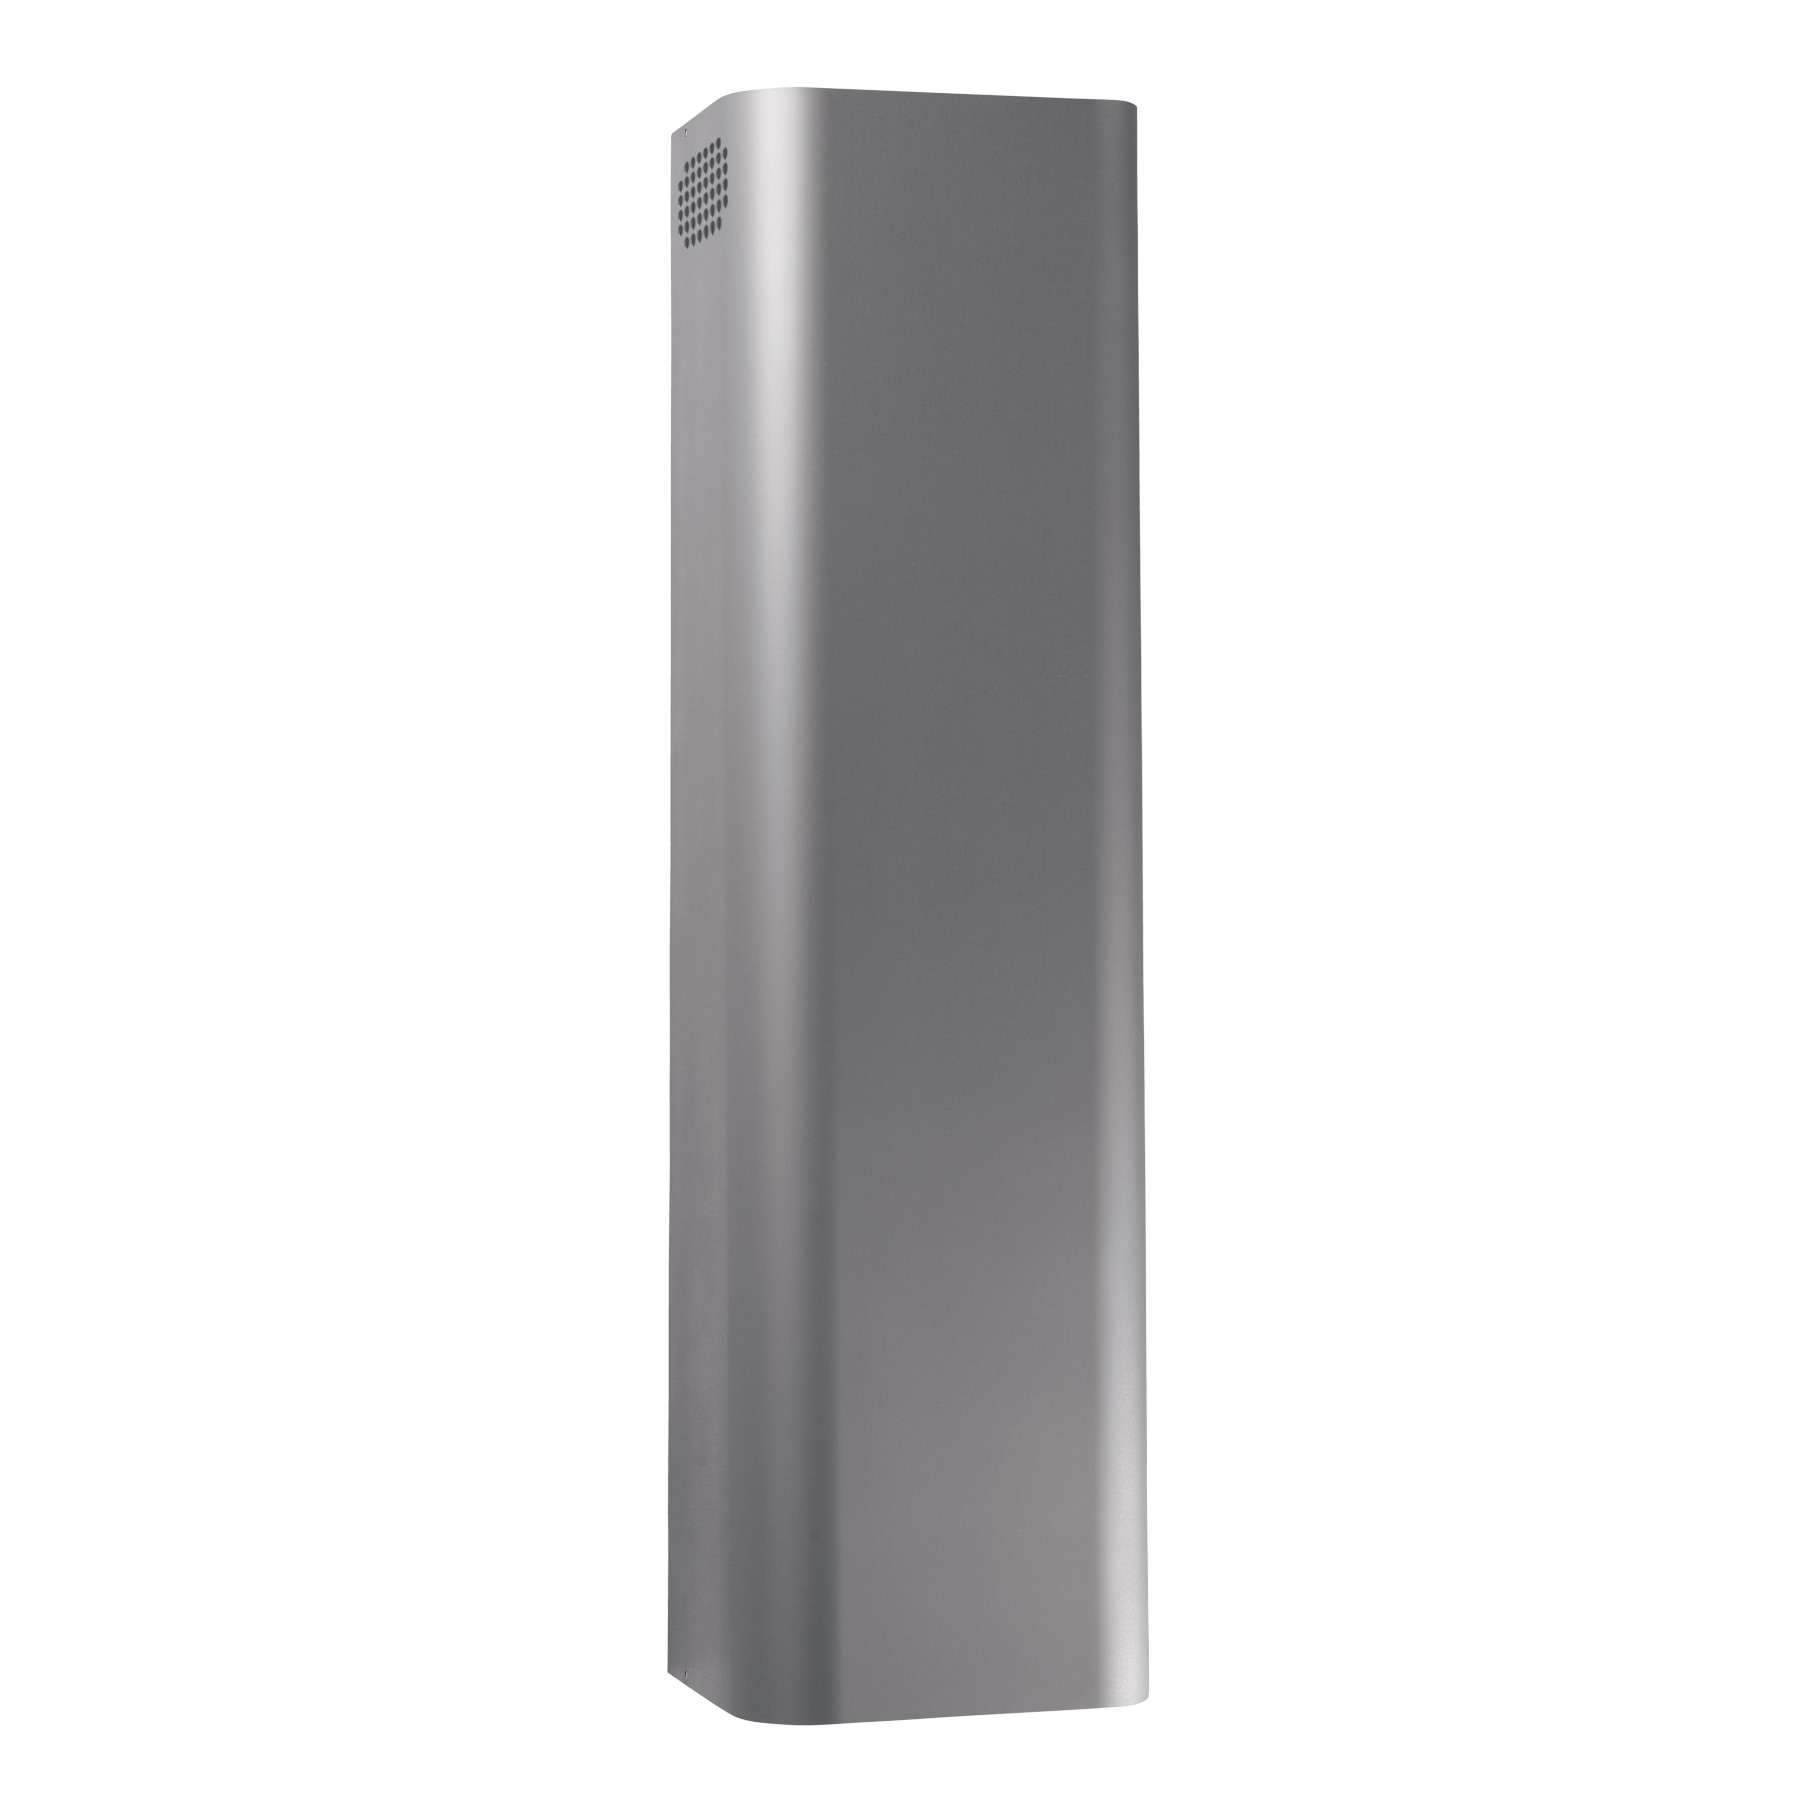 Optional Non-Ducted Flue Extension for E54000 in Stainless Steel